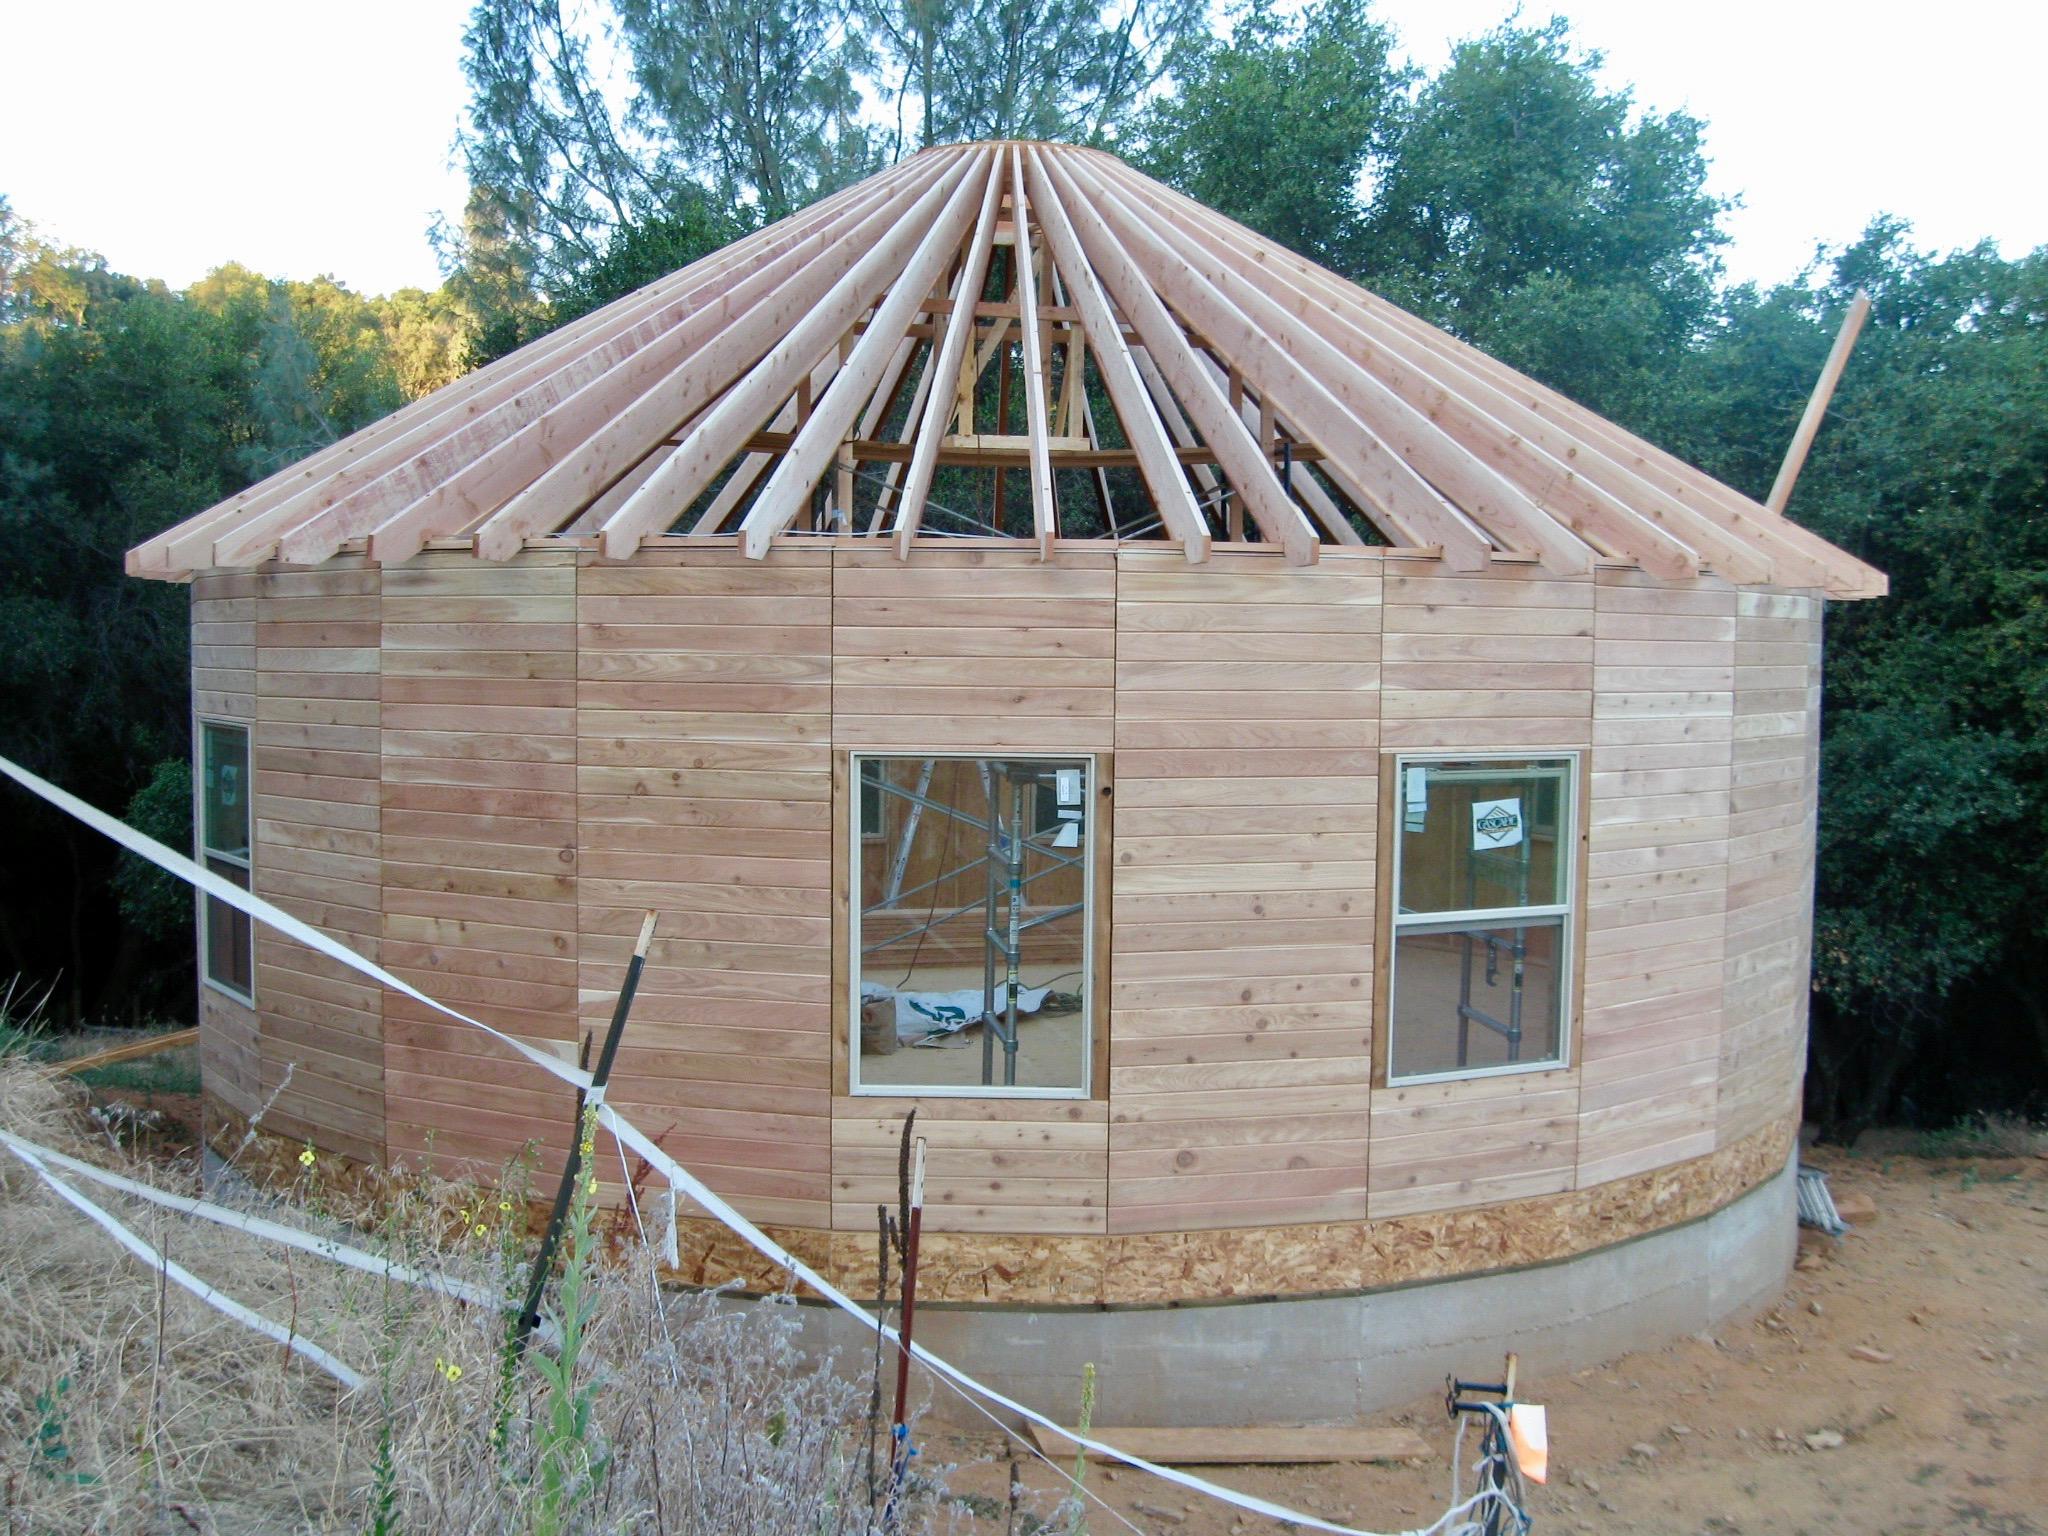 Wooden yurt under construction with rafters installed